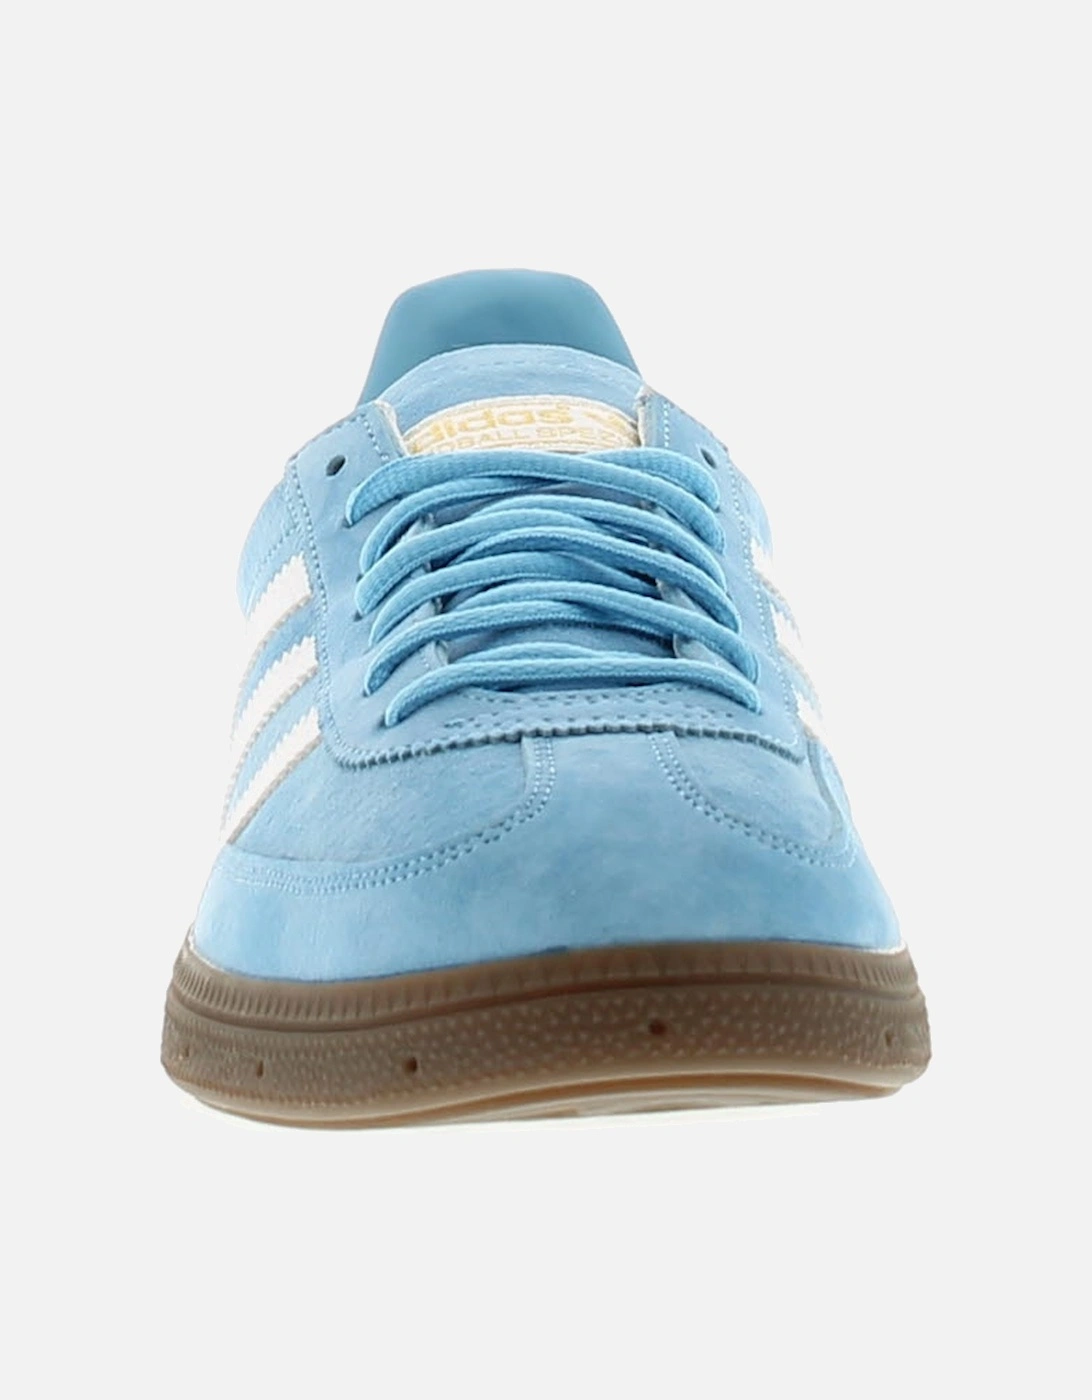 Mens Trainers Handball Spezial Leather Lace Up sky blue white U